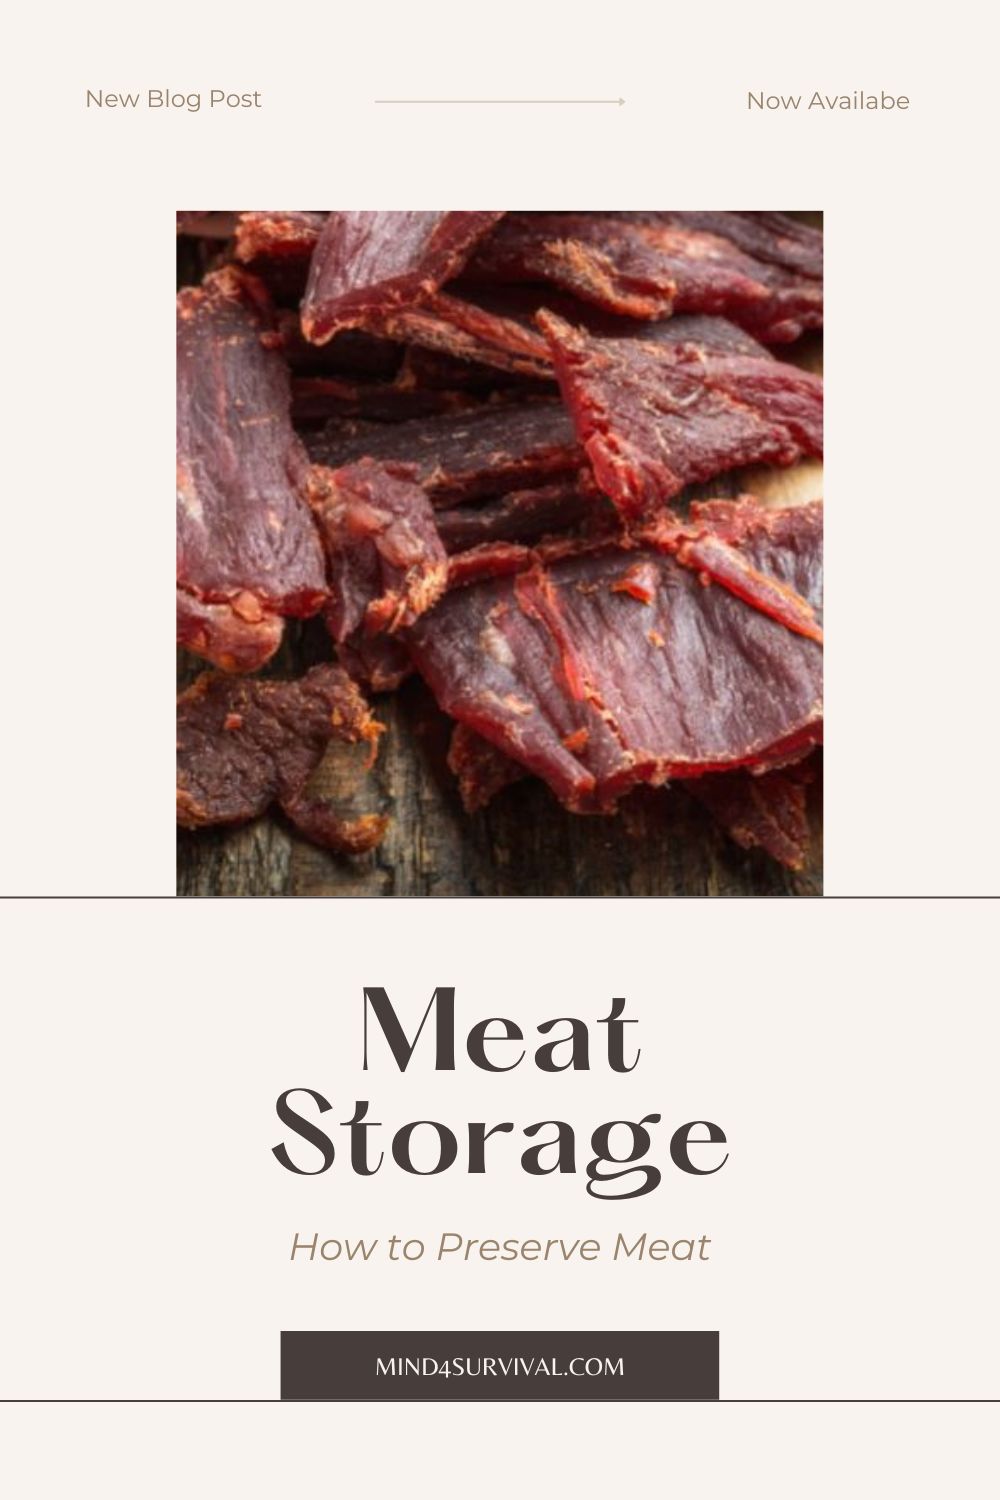 Meat Storage for When There Is No Freezer